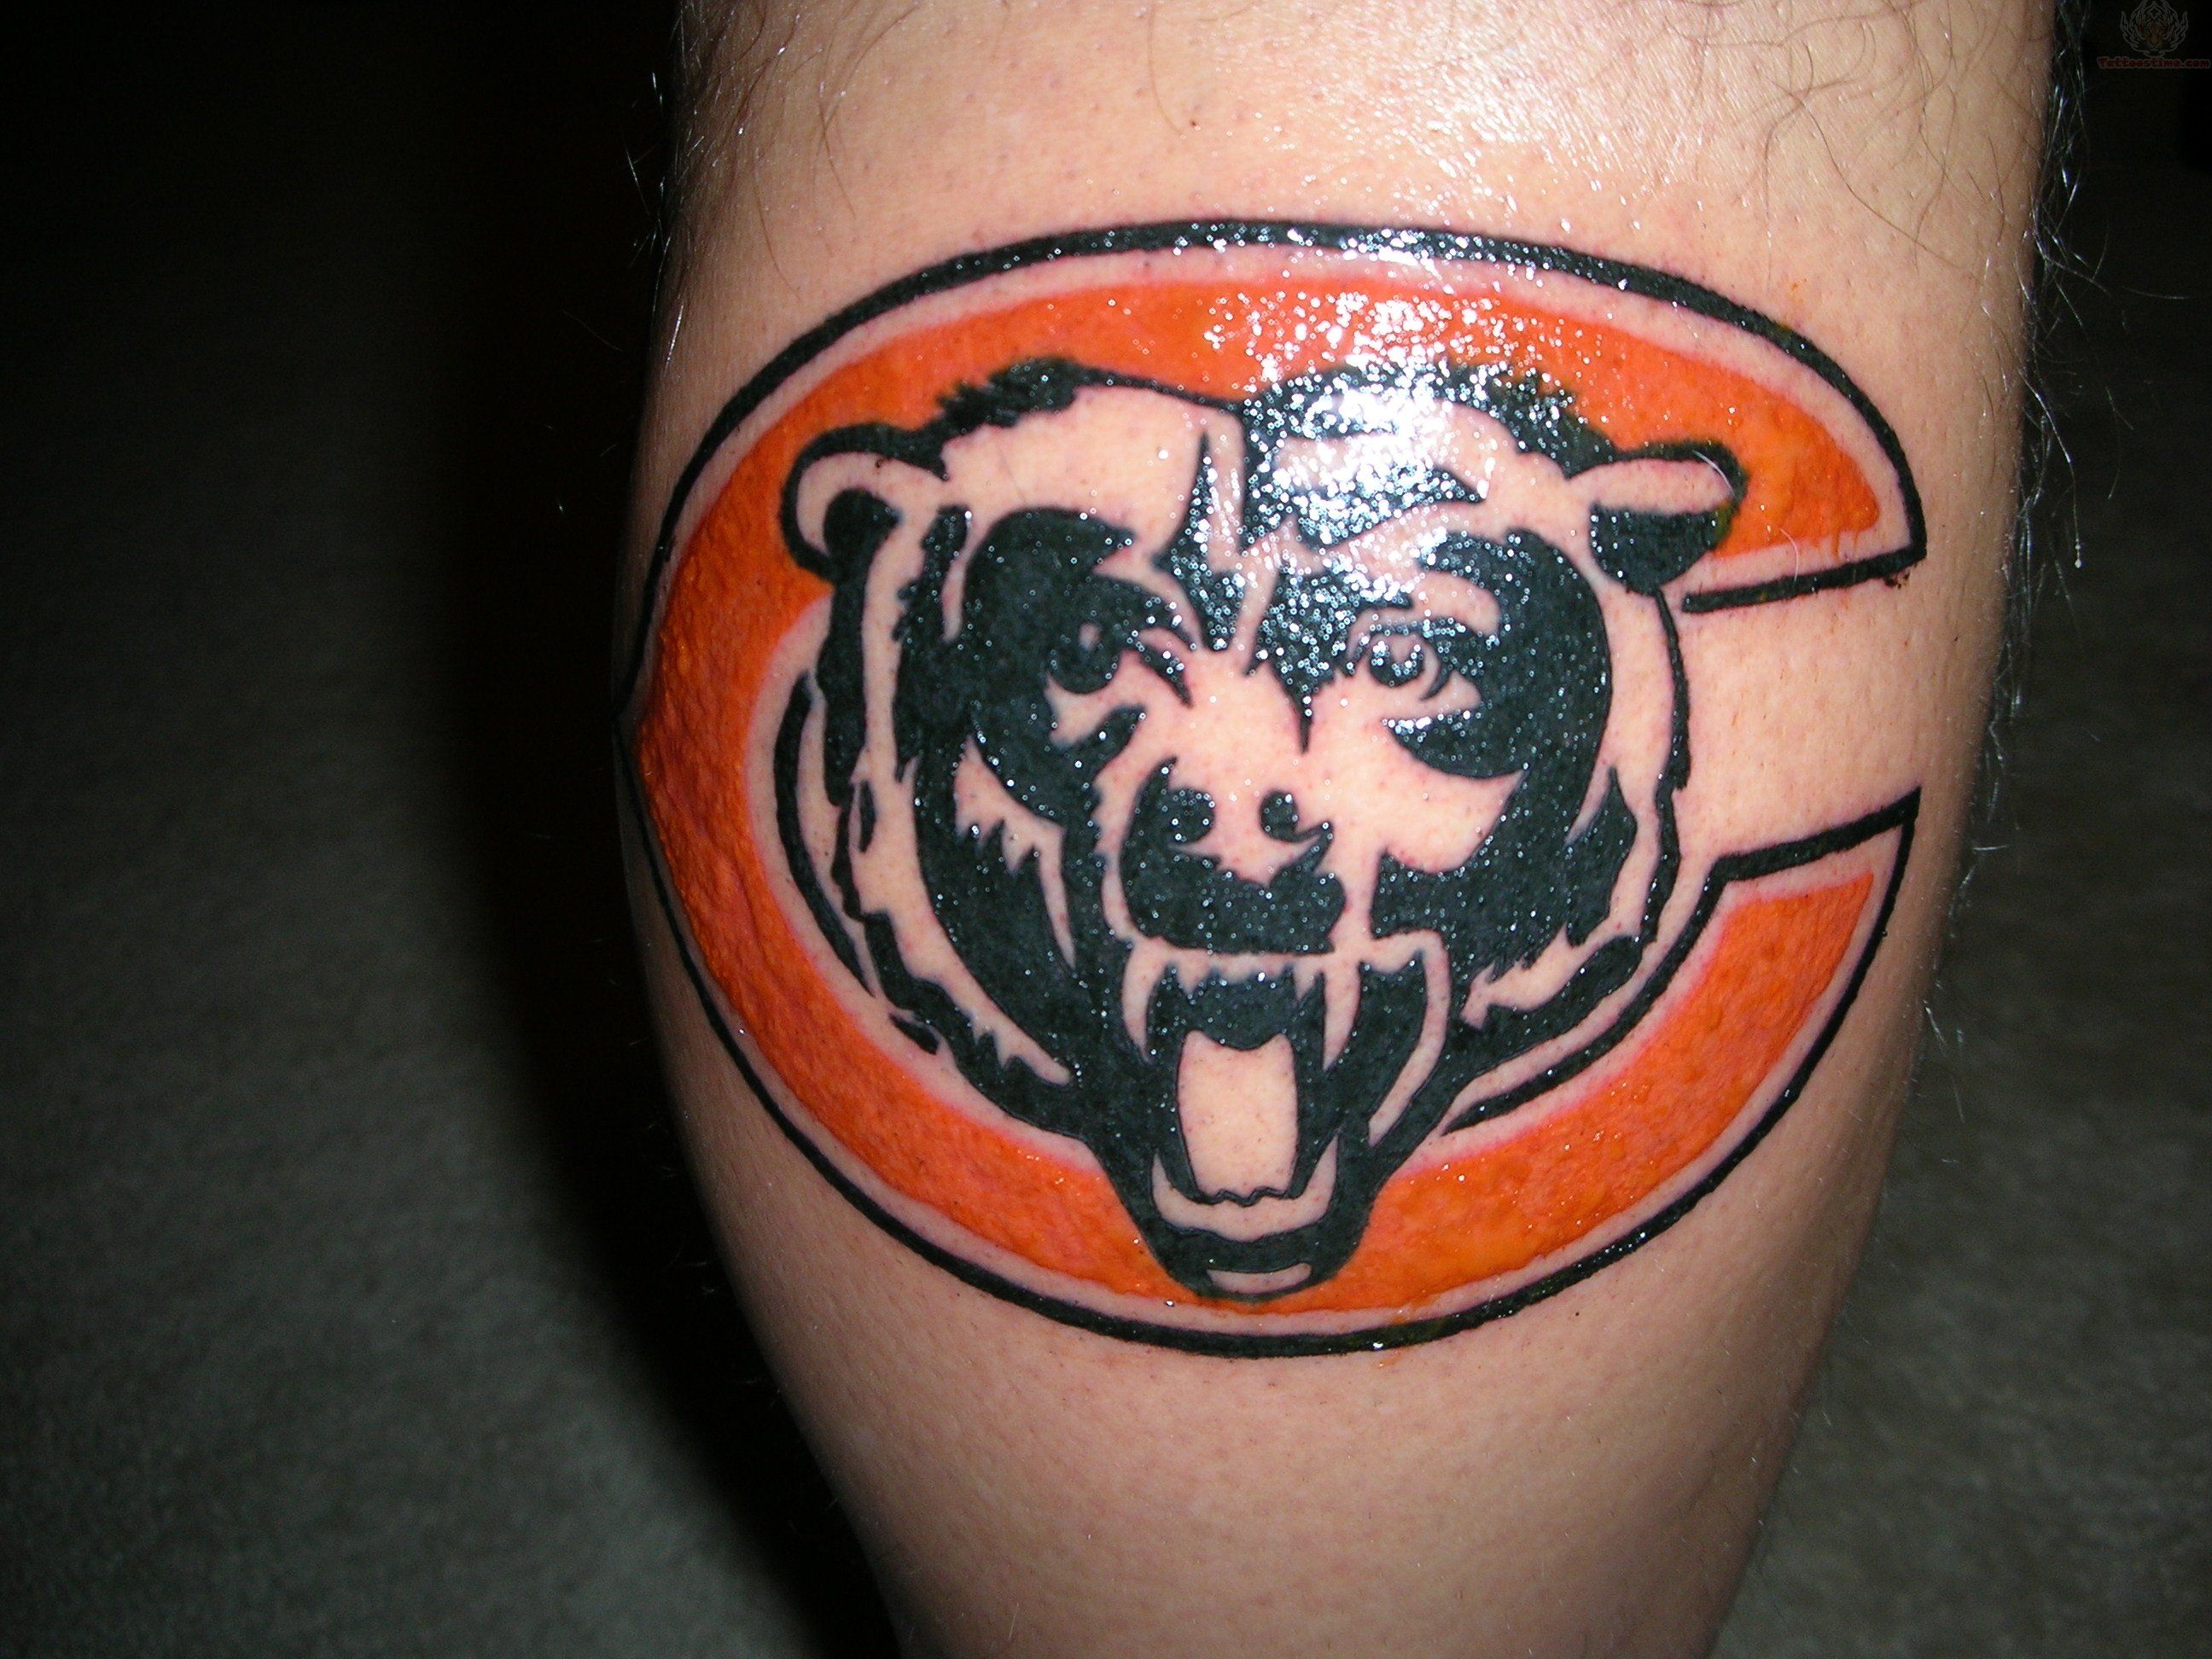 Chicago Bears Fan Tattoo – Loyalty is Everything